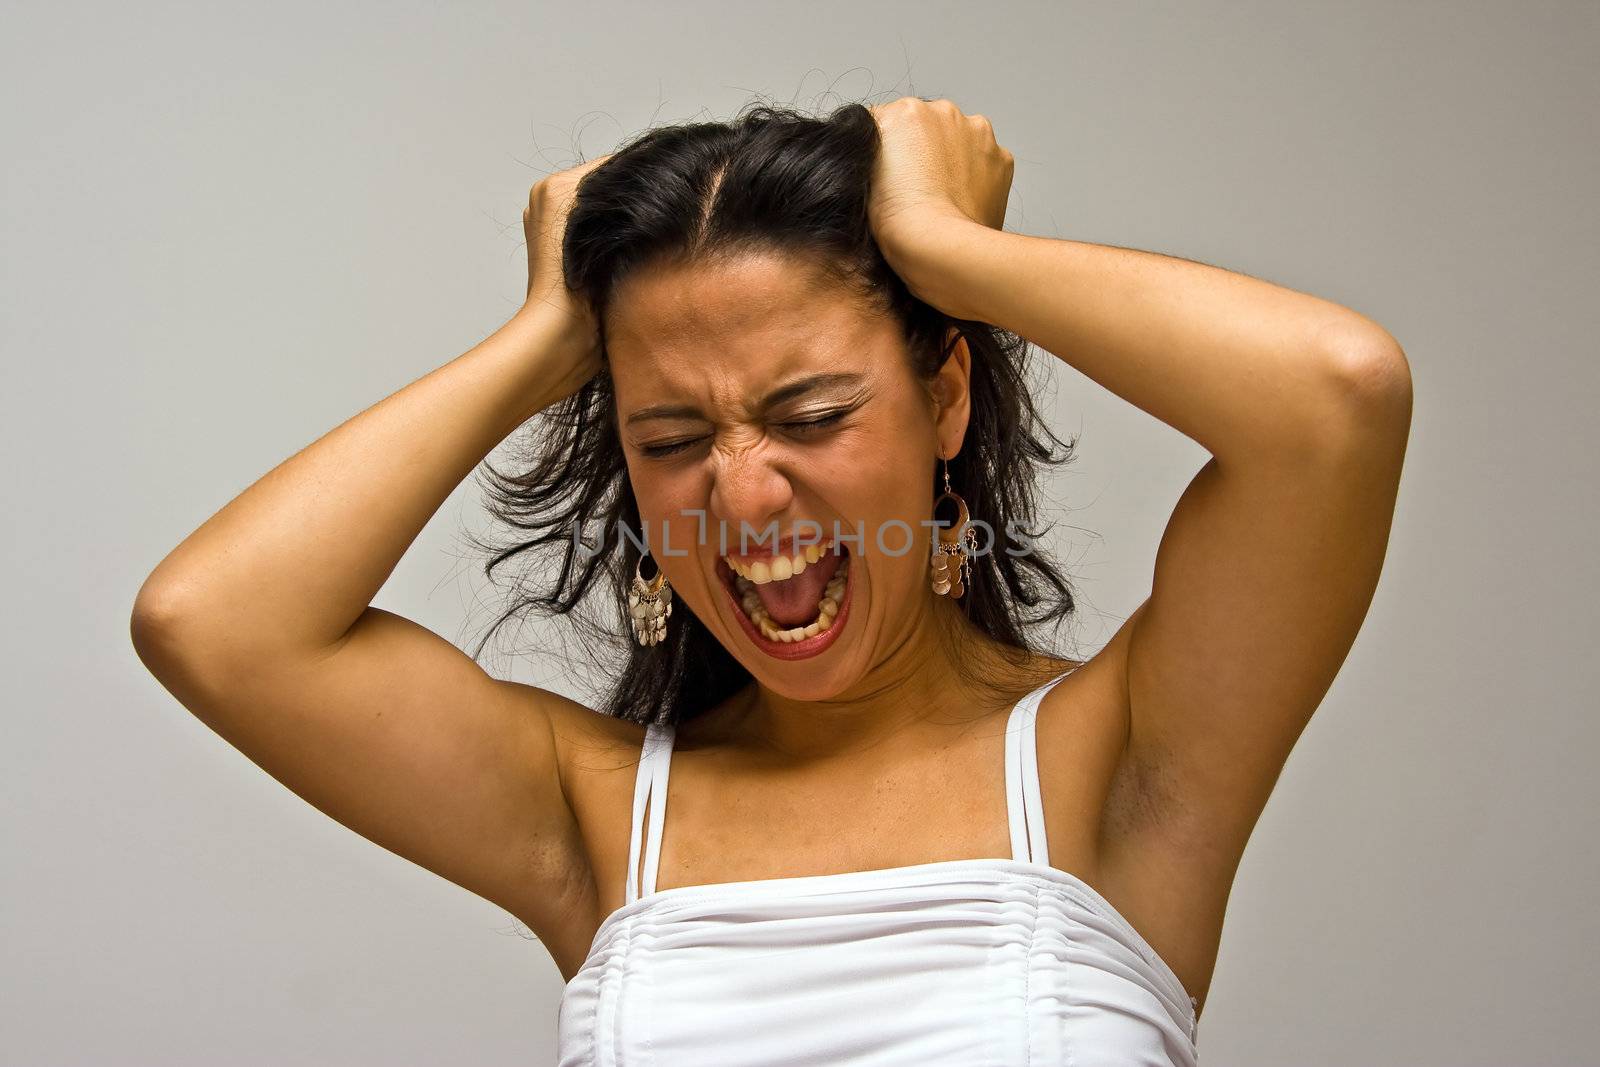 A young beautiful latina woman screeming of frustration and pulling her hair with both hands wearing a white shirt, isolated on white